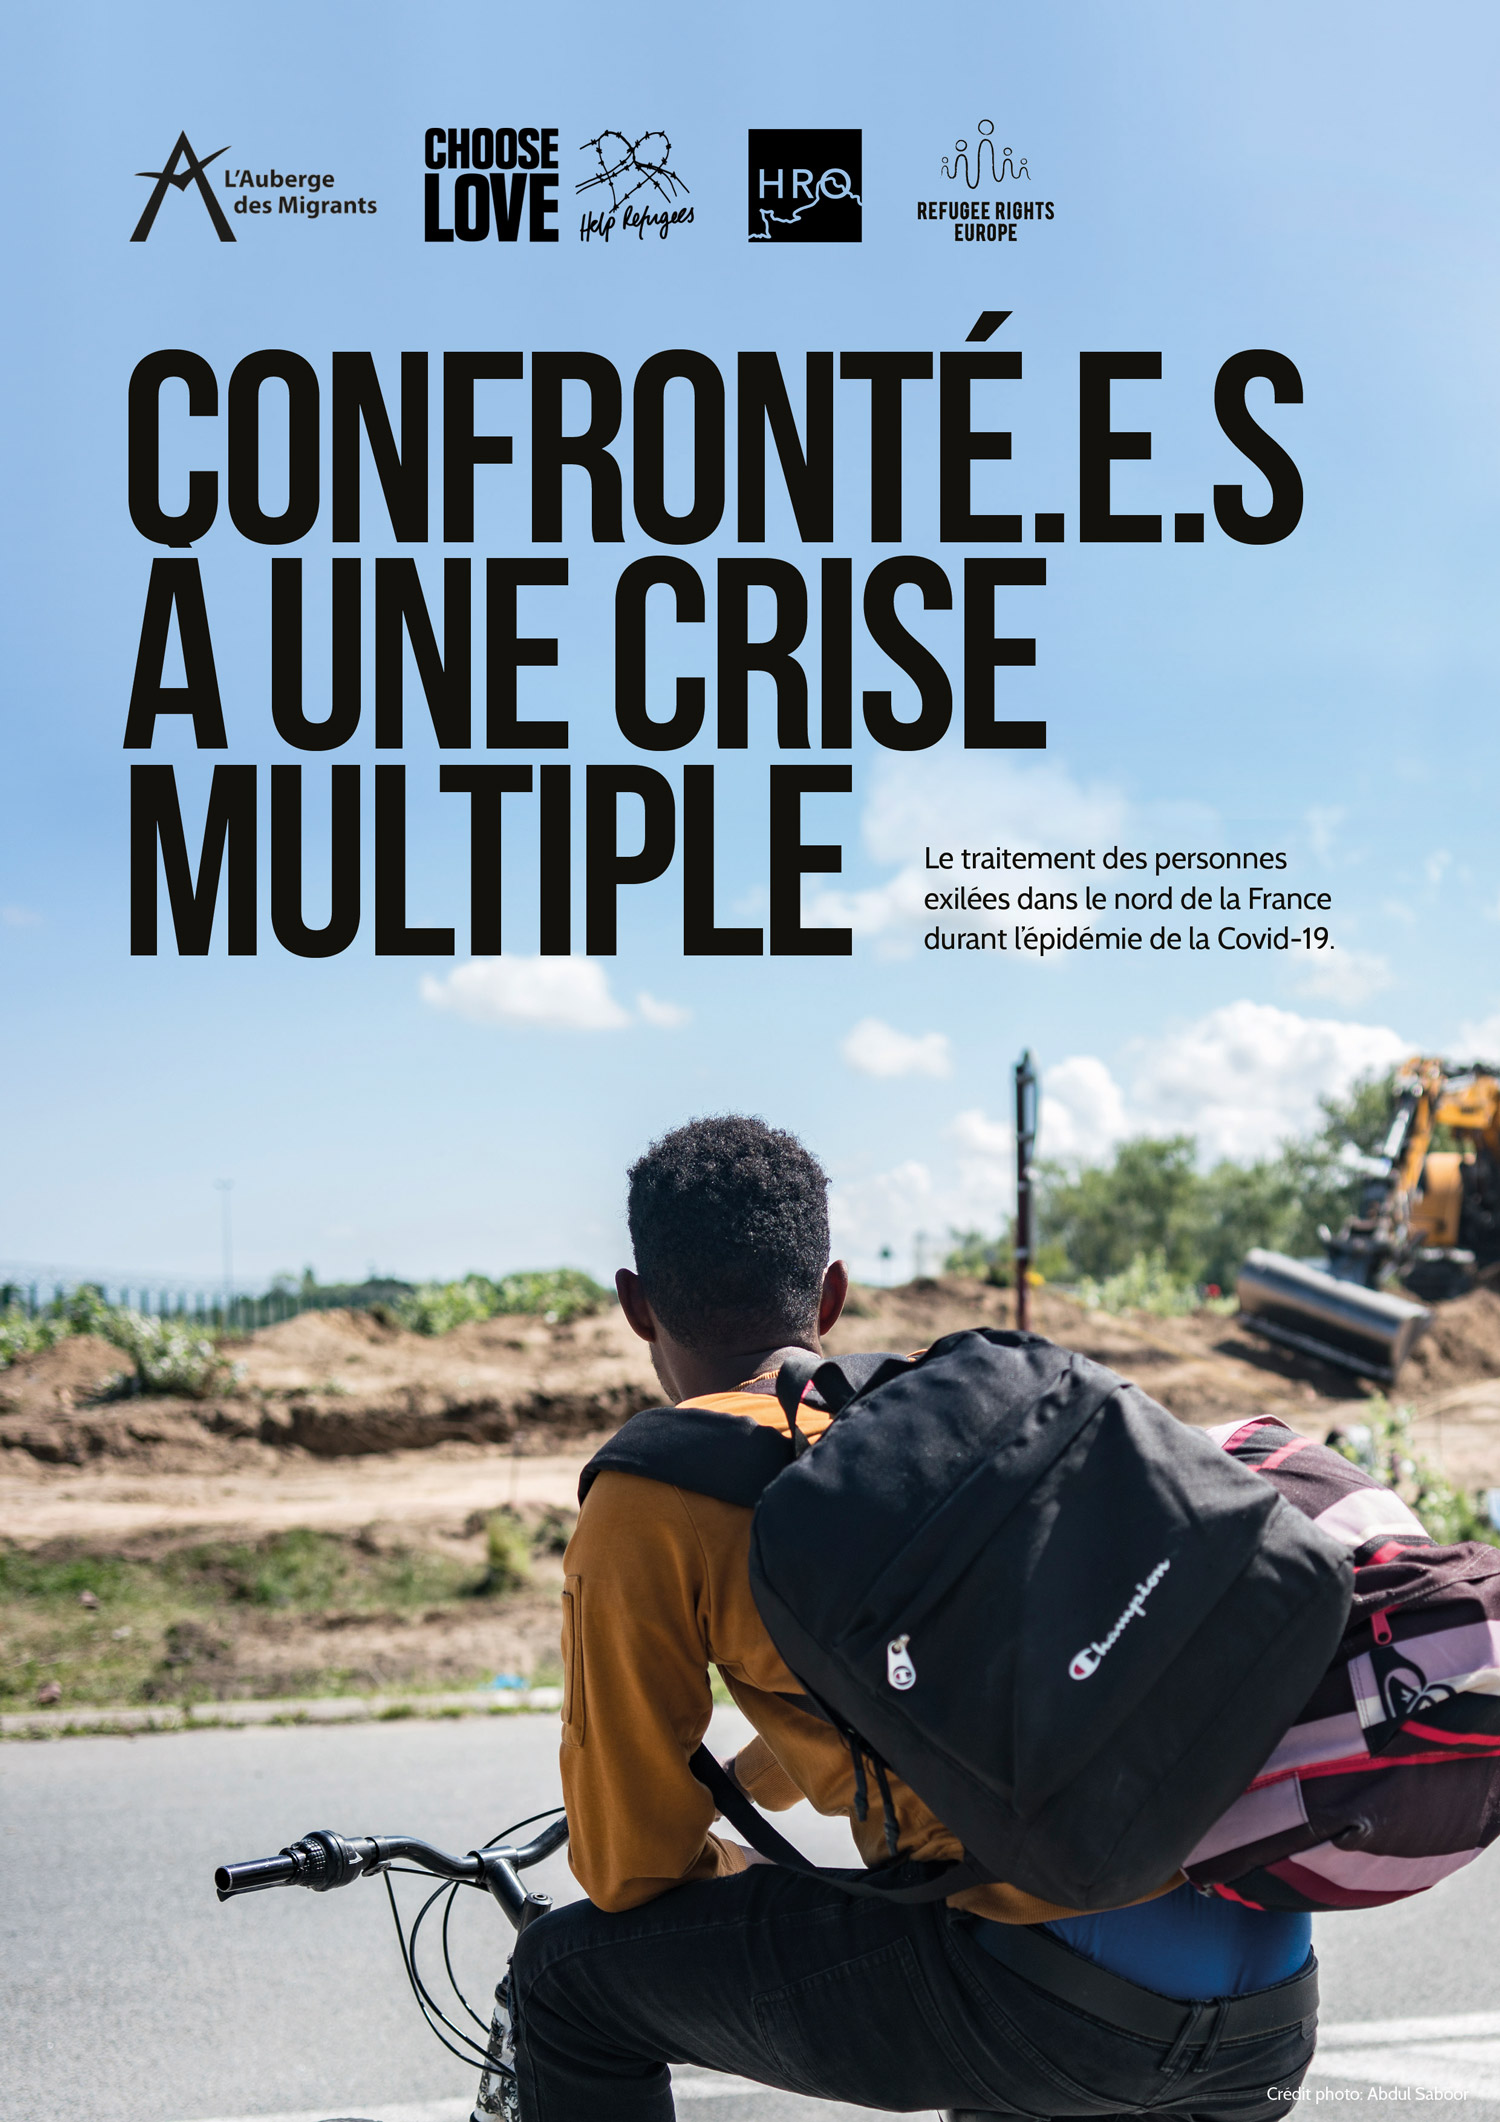 HRO Human Rights Observers Refugee Rights Europe Report Confrontes a Une Crise Multiple